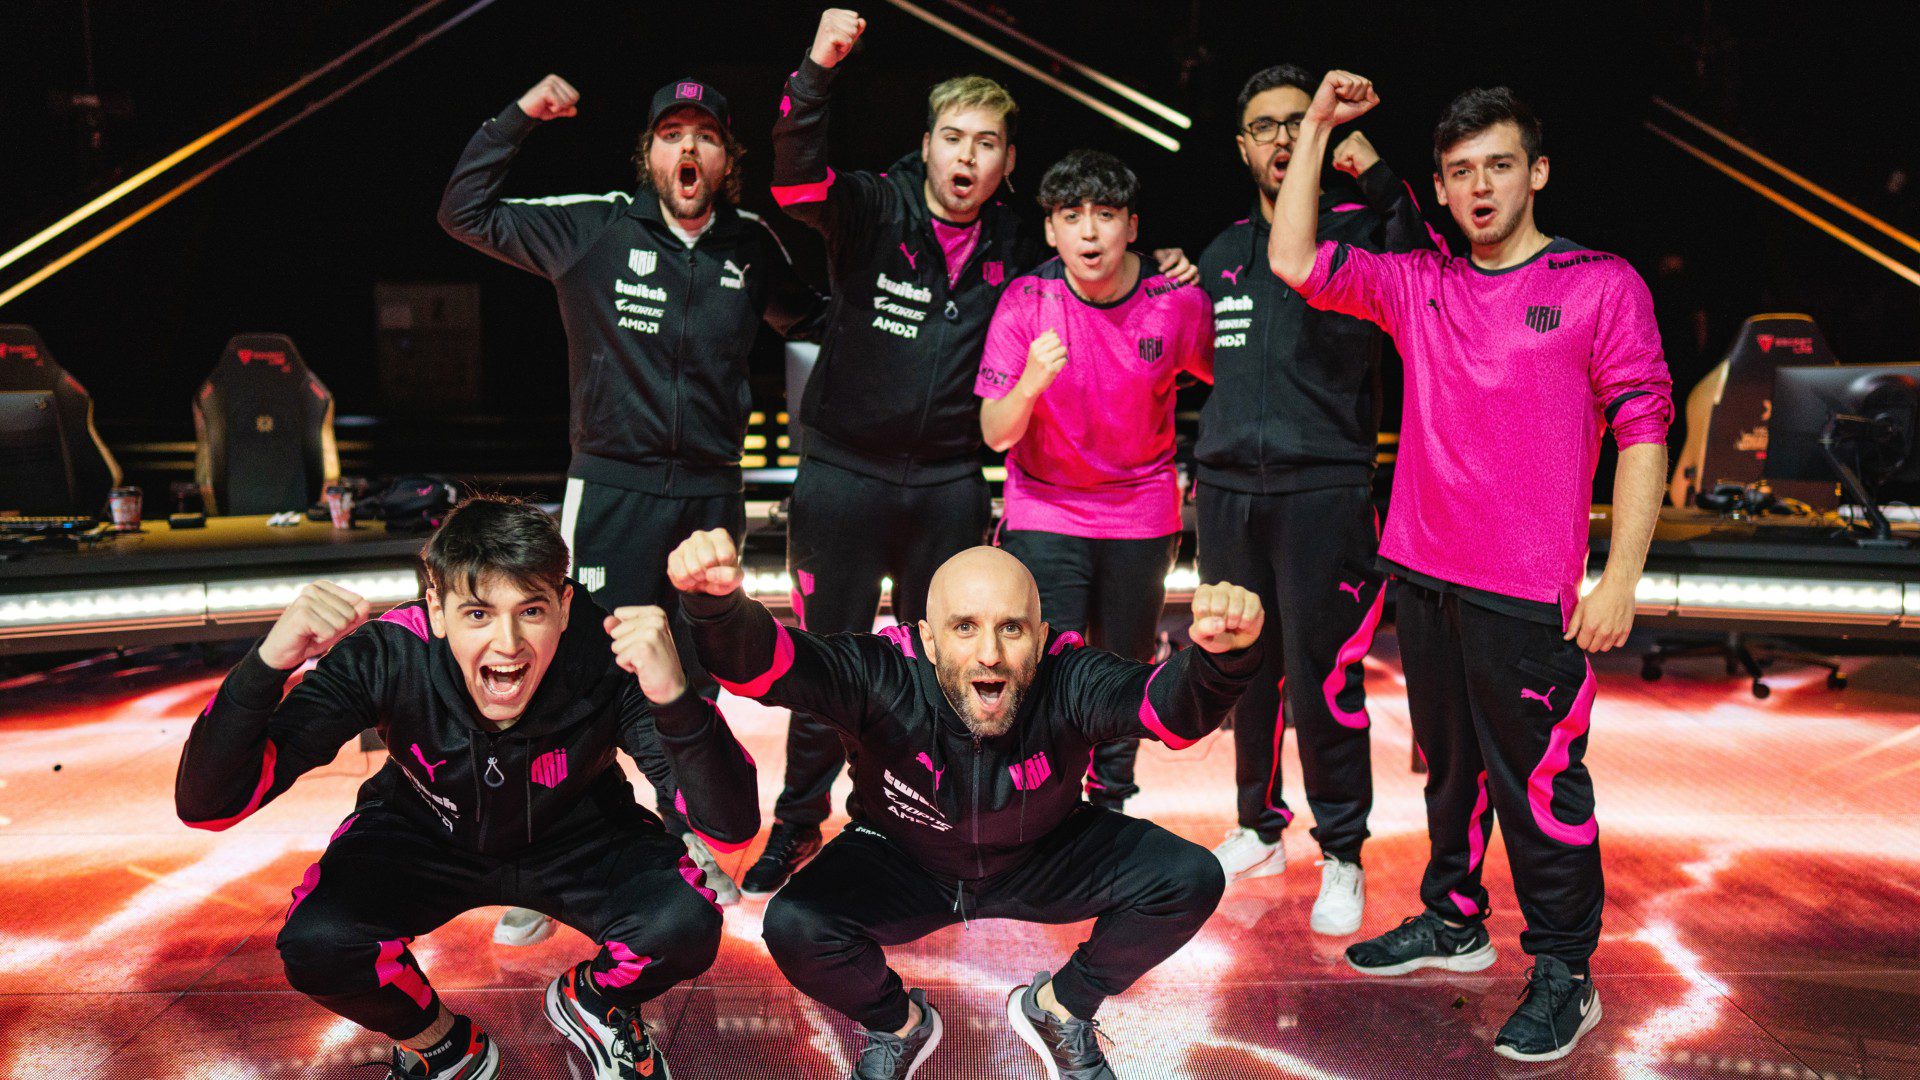 The roster for KRÜ Esports cheer on stage after knocking out the Sentinels at the Valorant Champions event